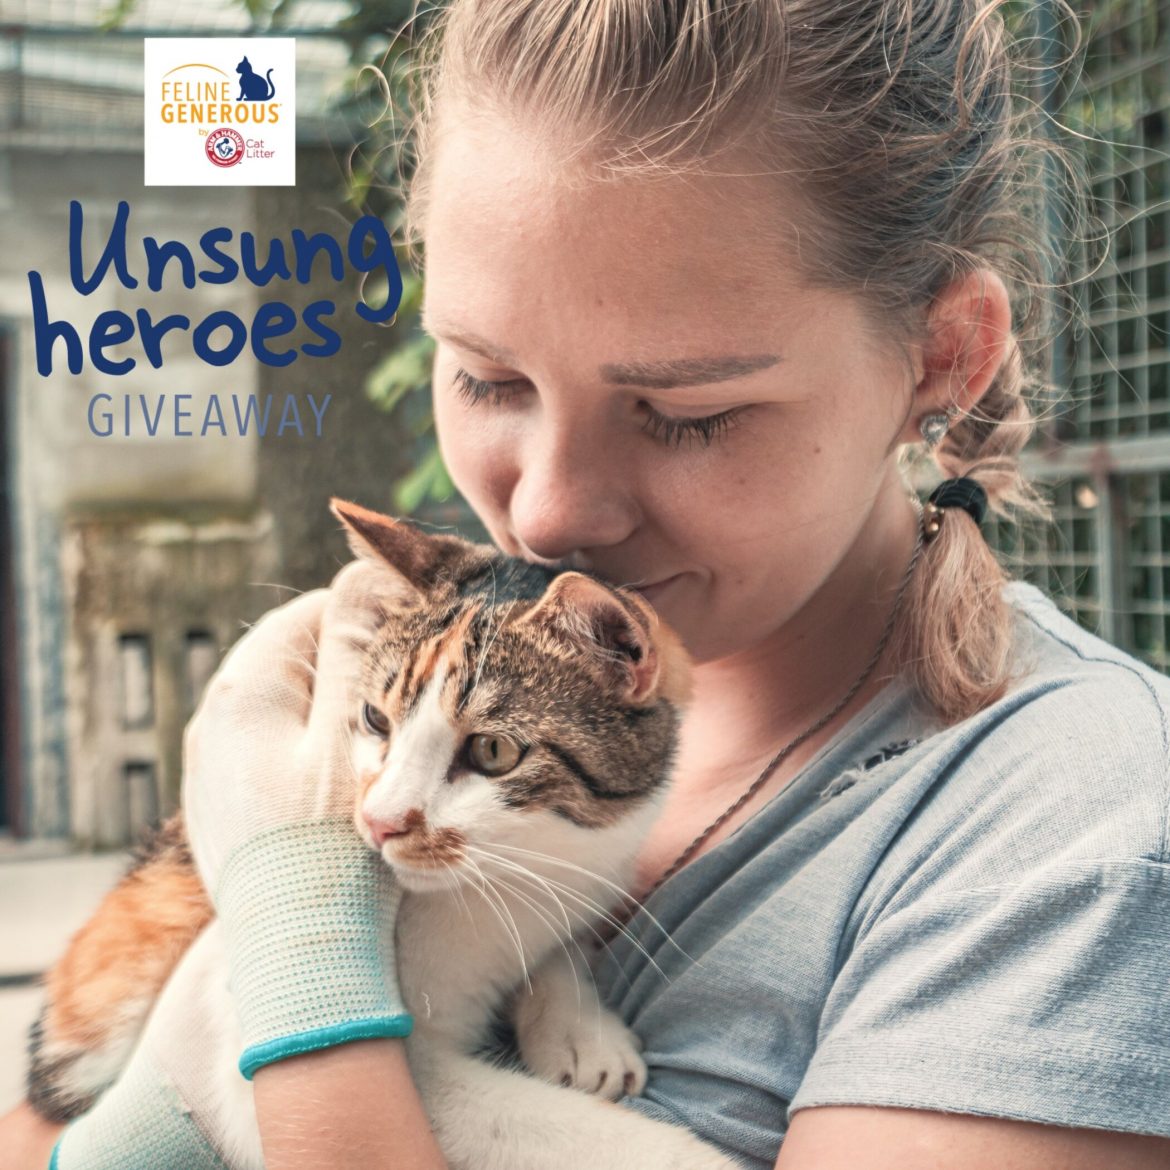 The ARM & HAMMER™ Feline Generous Program Launches “Unsung Heroes” Awards to Celebrate Staff and Volunteers at Cat Welfare Organizations and Will Donate a Total of $30,000 #FelineGenerous #UnsungHeroes